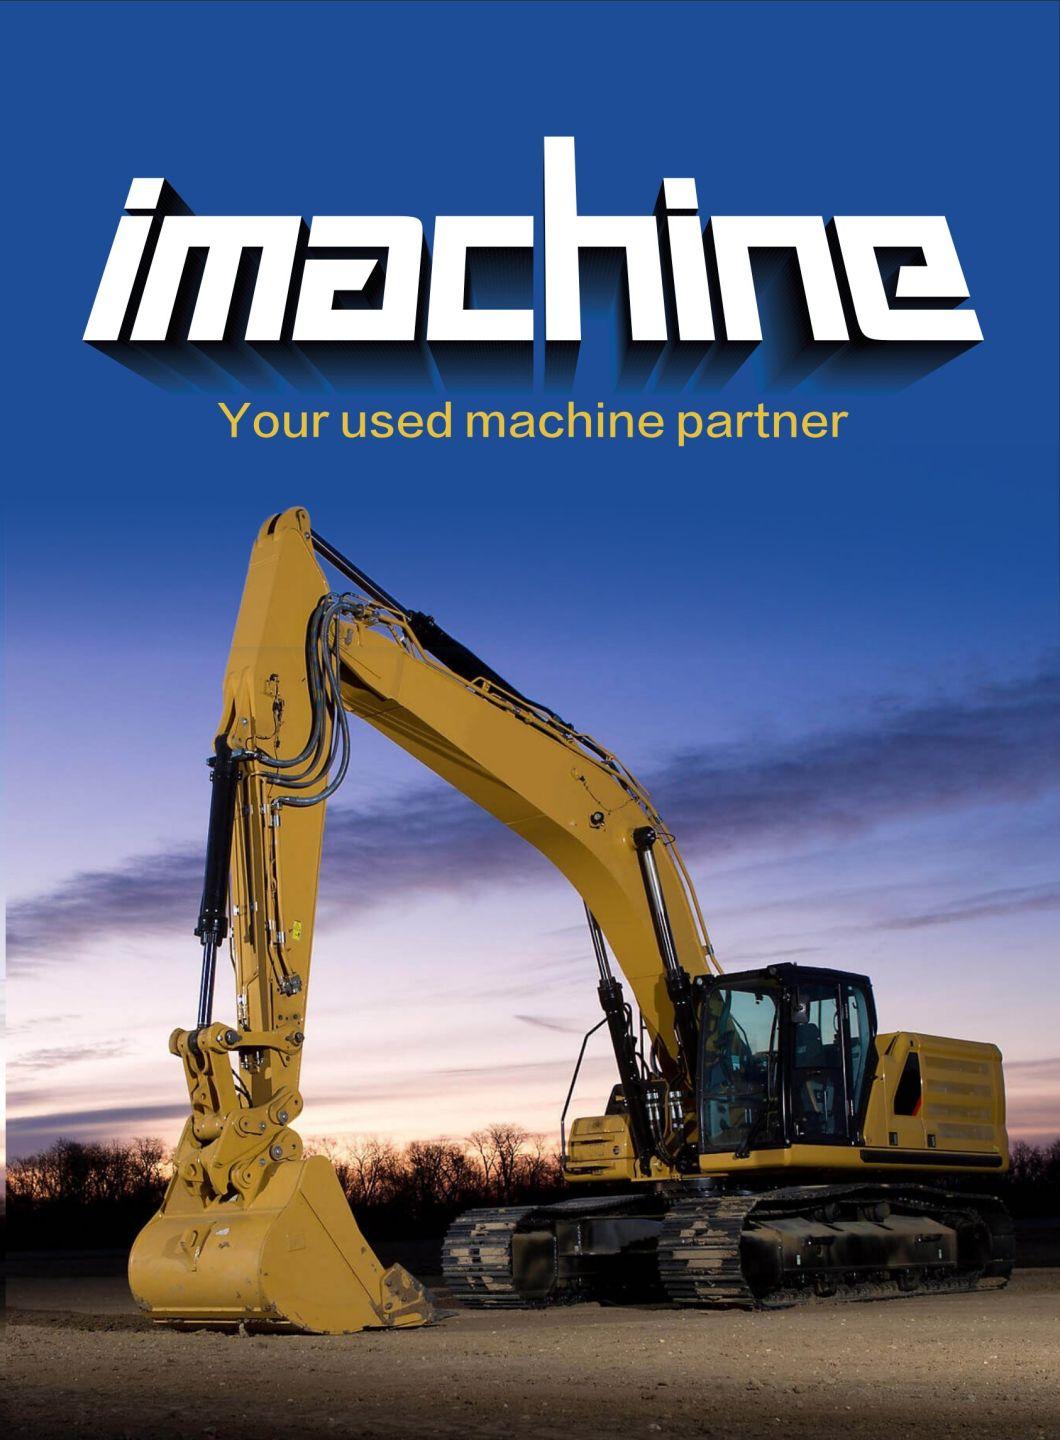 Imachine Used Caterpllar D11 Large Excavator in Stock for Sale Great Condition